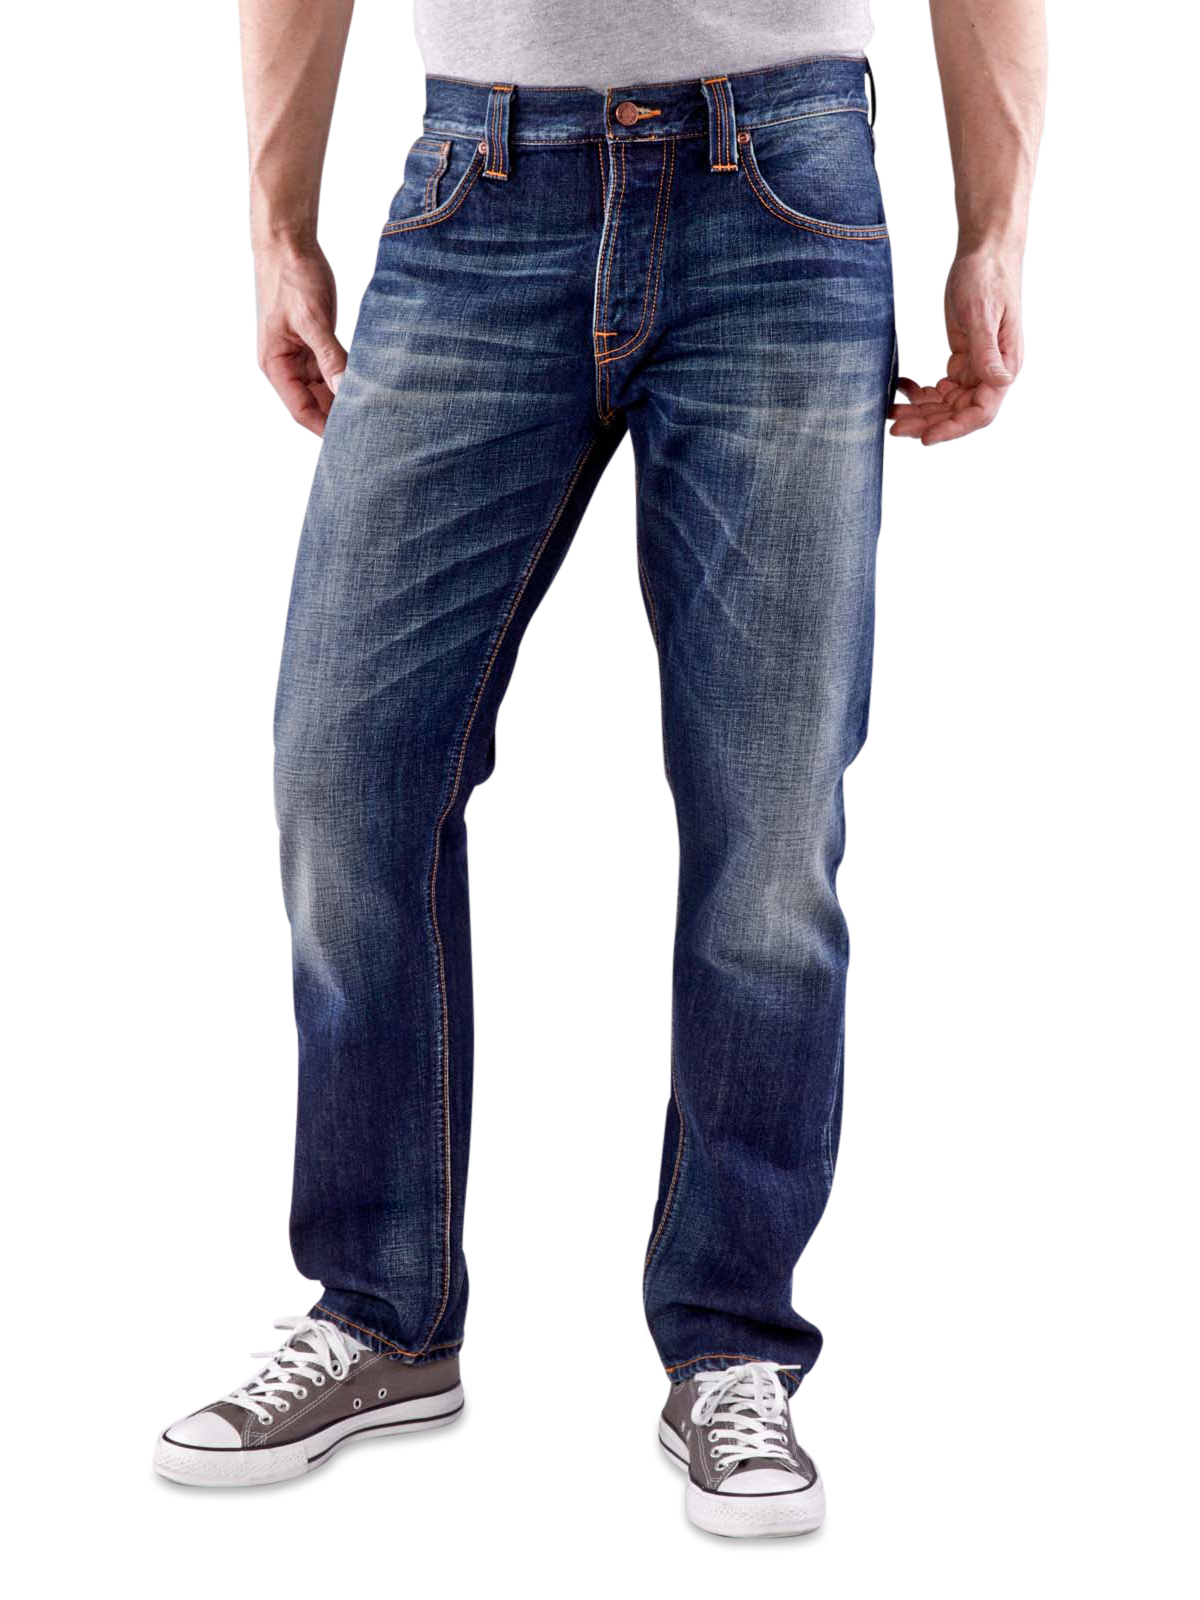 Jeans PNG Background Image